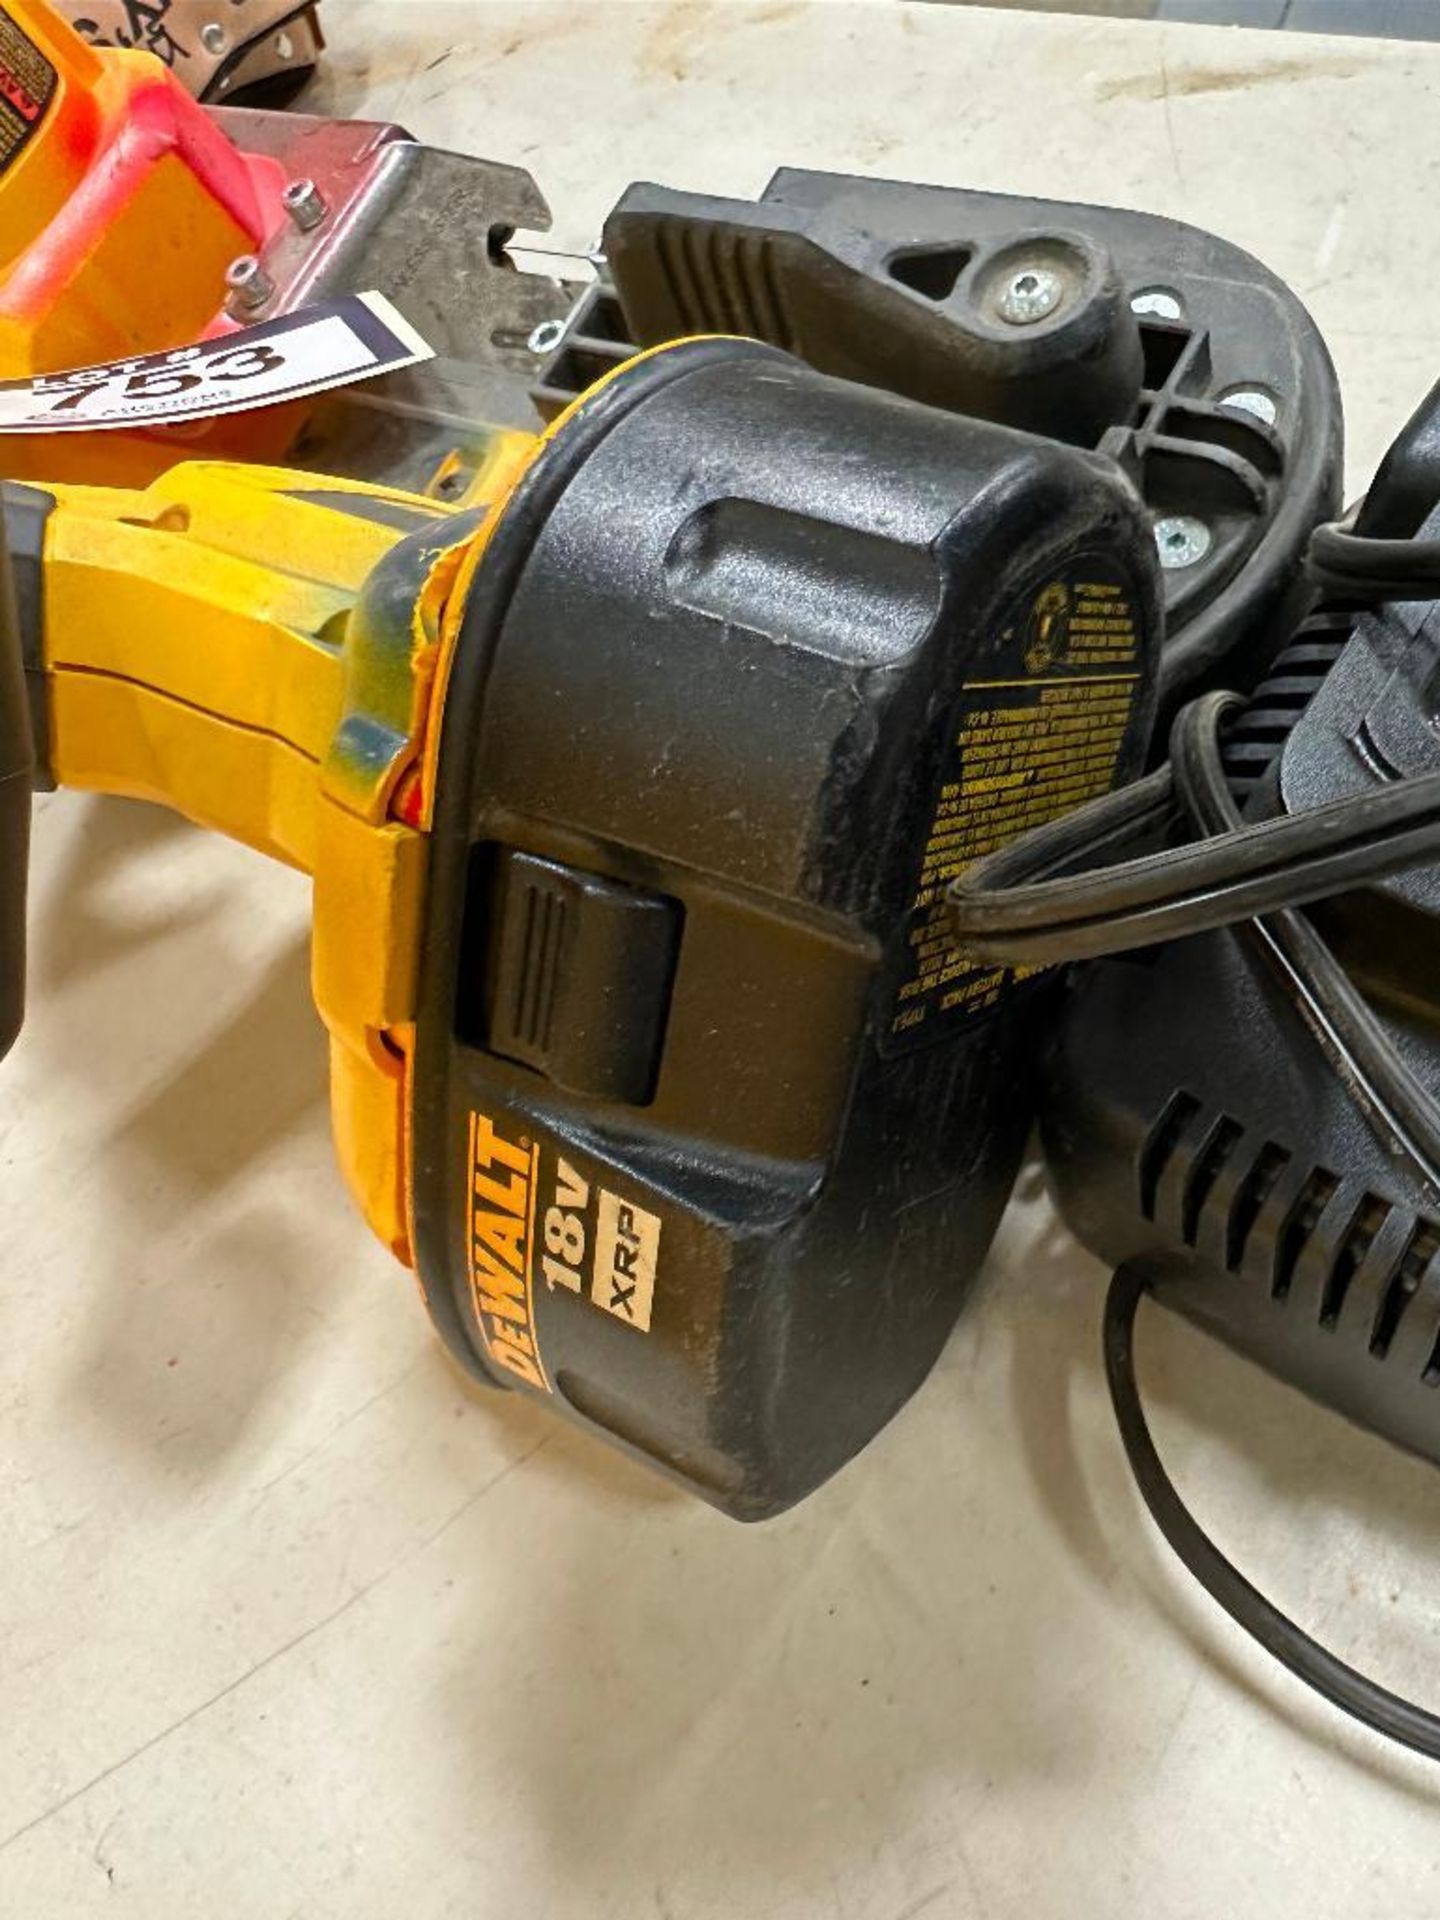 DeWalt DCS370 18V Cordless Band Saw w/ Battery and Charger - Image 6 of 6